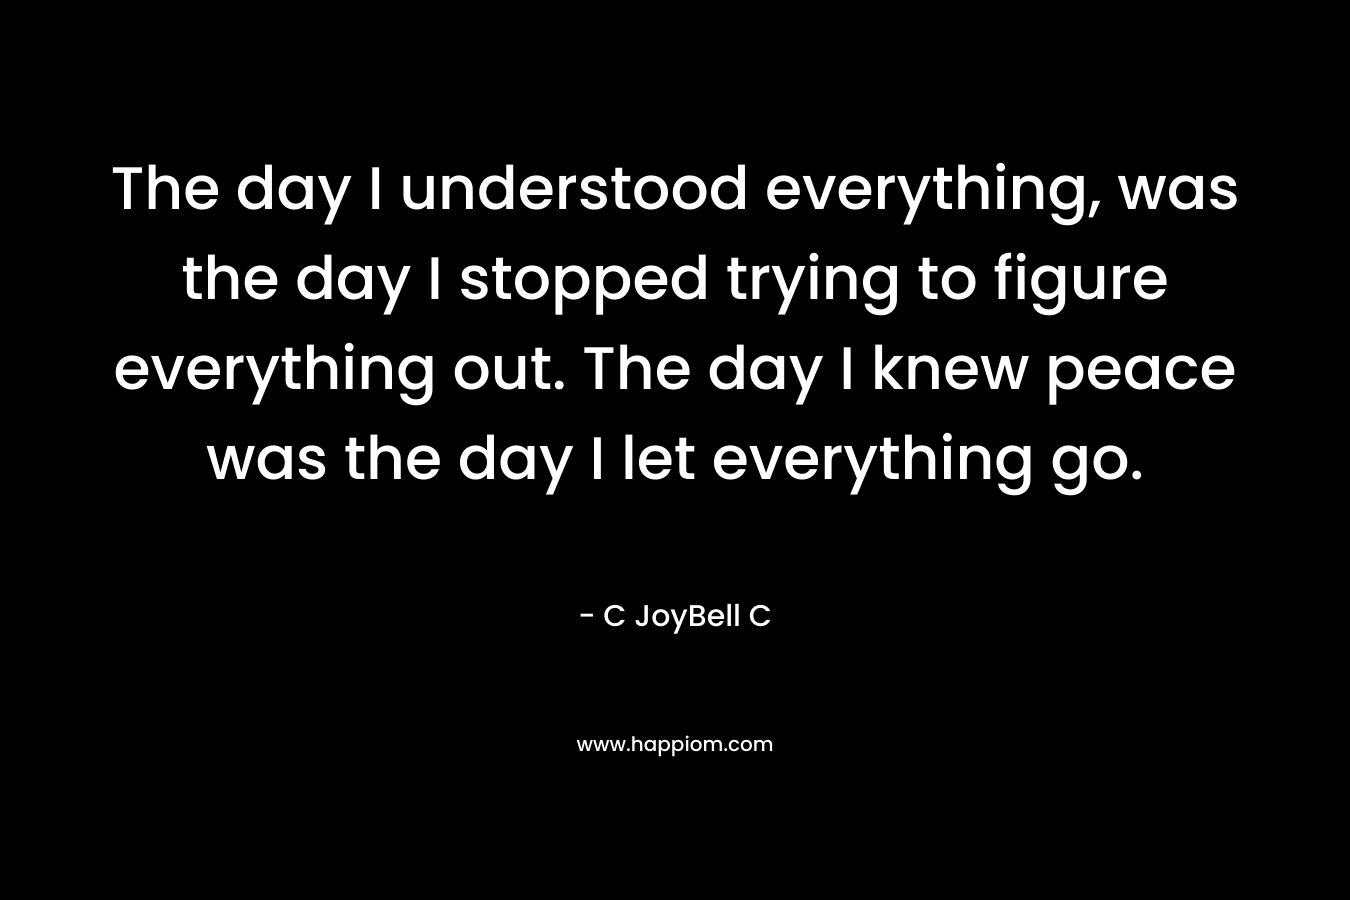 The day I understood everything, was the day I stopped trying to figure everything out. The day I knew peace was the day I let everything go.